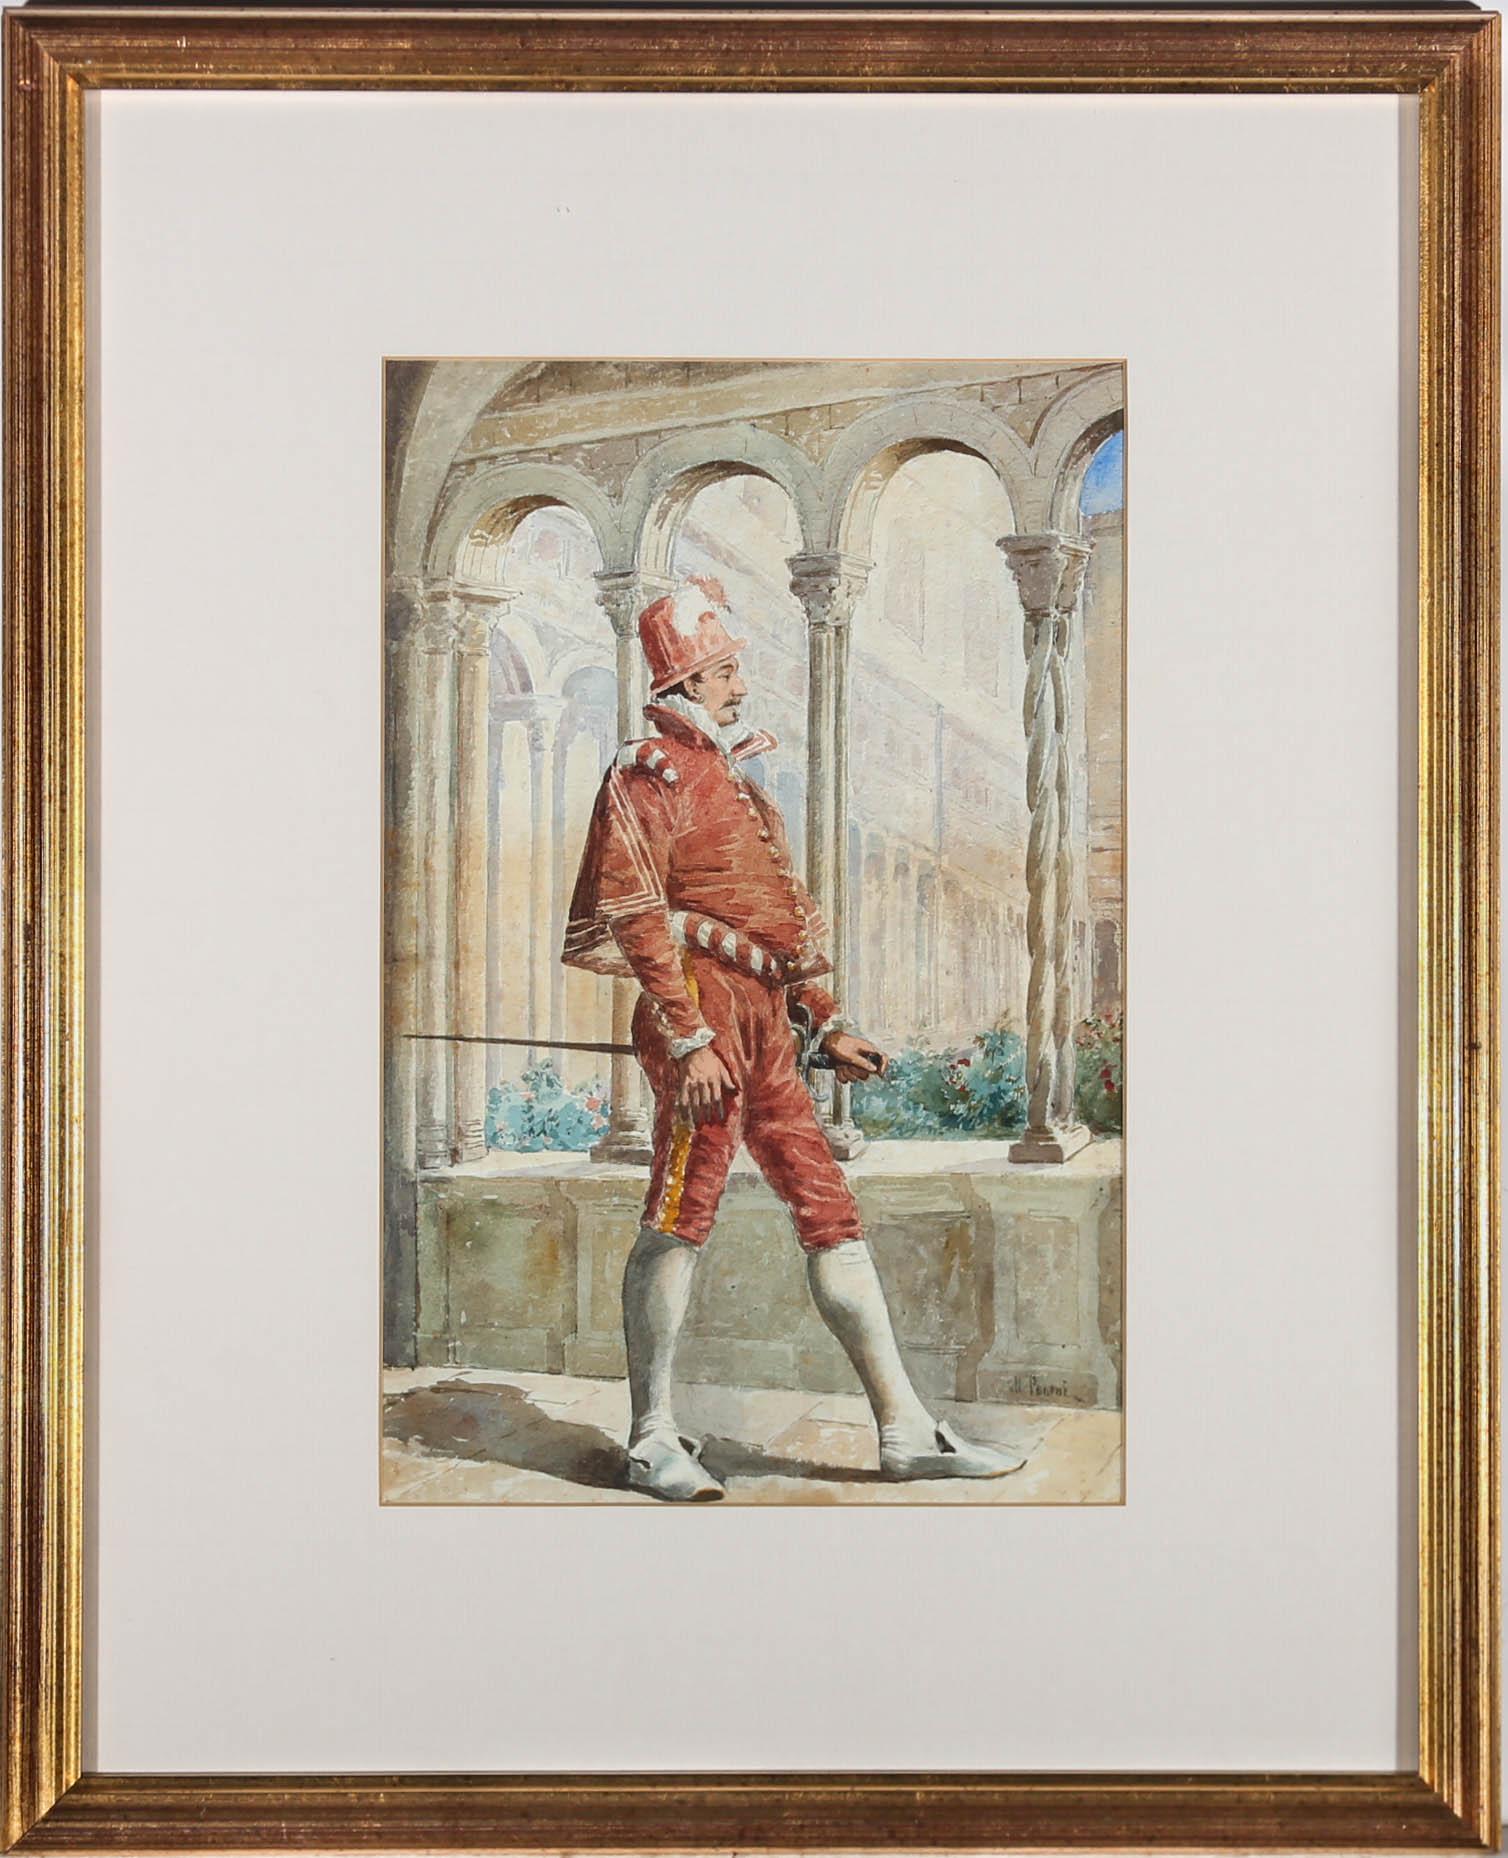 Unknown Portrait - Framed 19th Century Watercolour - Cavalier at Court